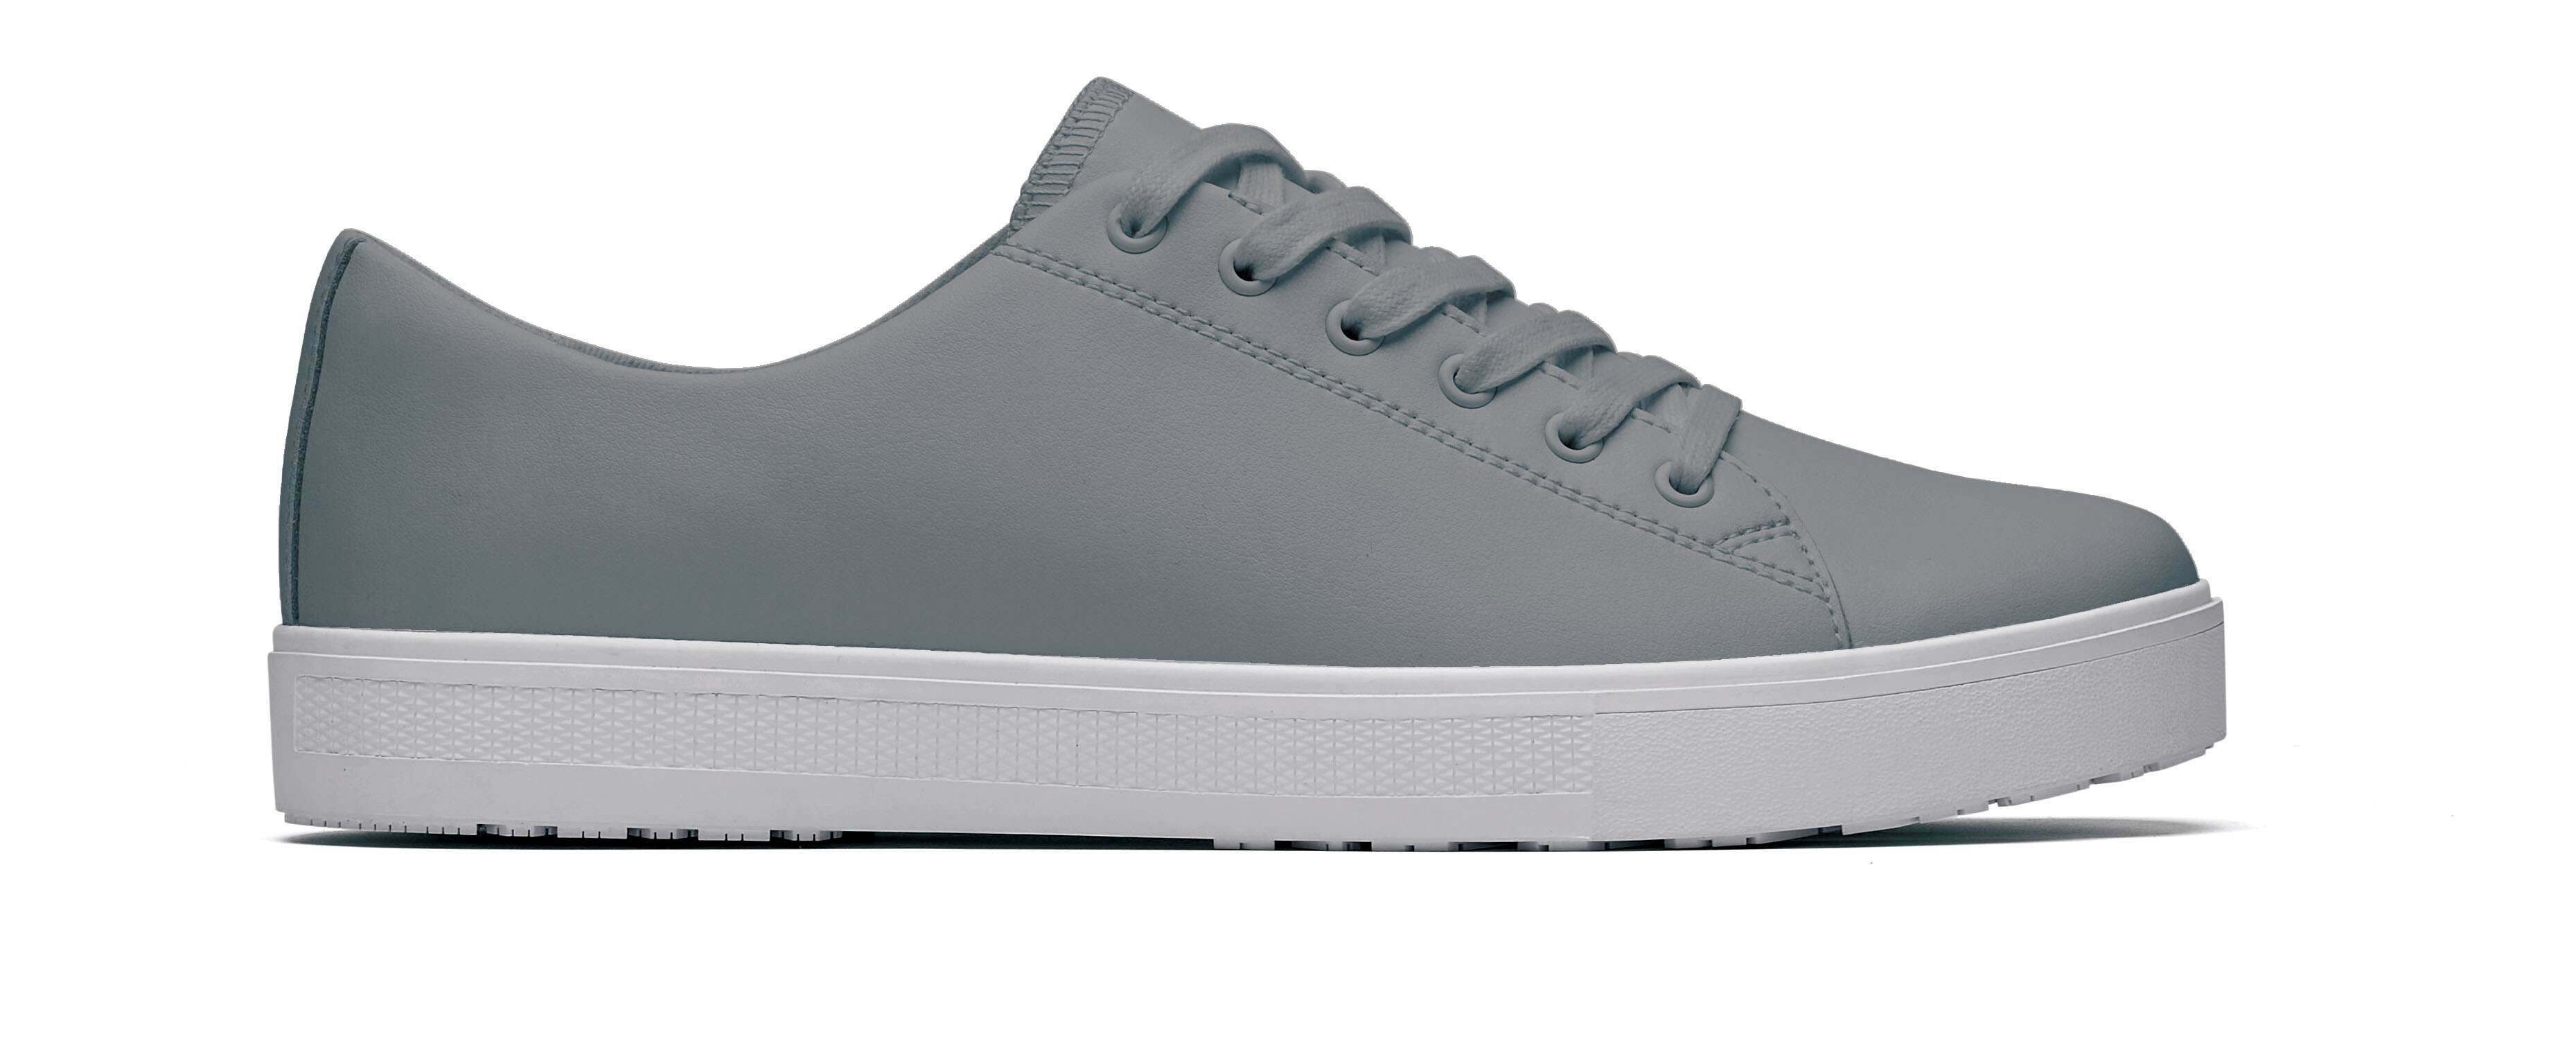 The Old School Low-Rider Wild Dove from Shoes For Crews is a slip resistant lace-up shoe designed to provide comfort throughout the day, seen from the right.